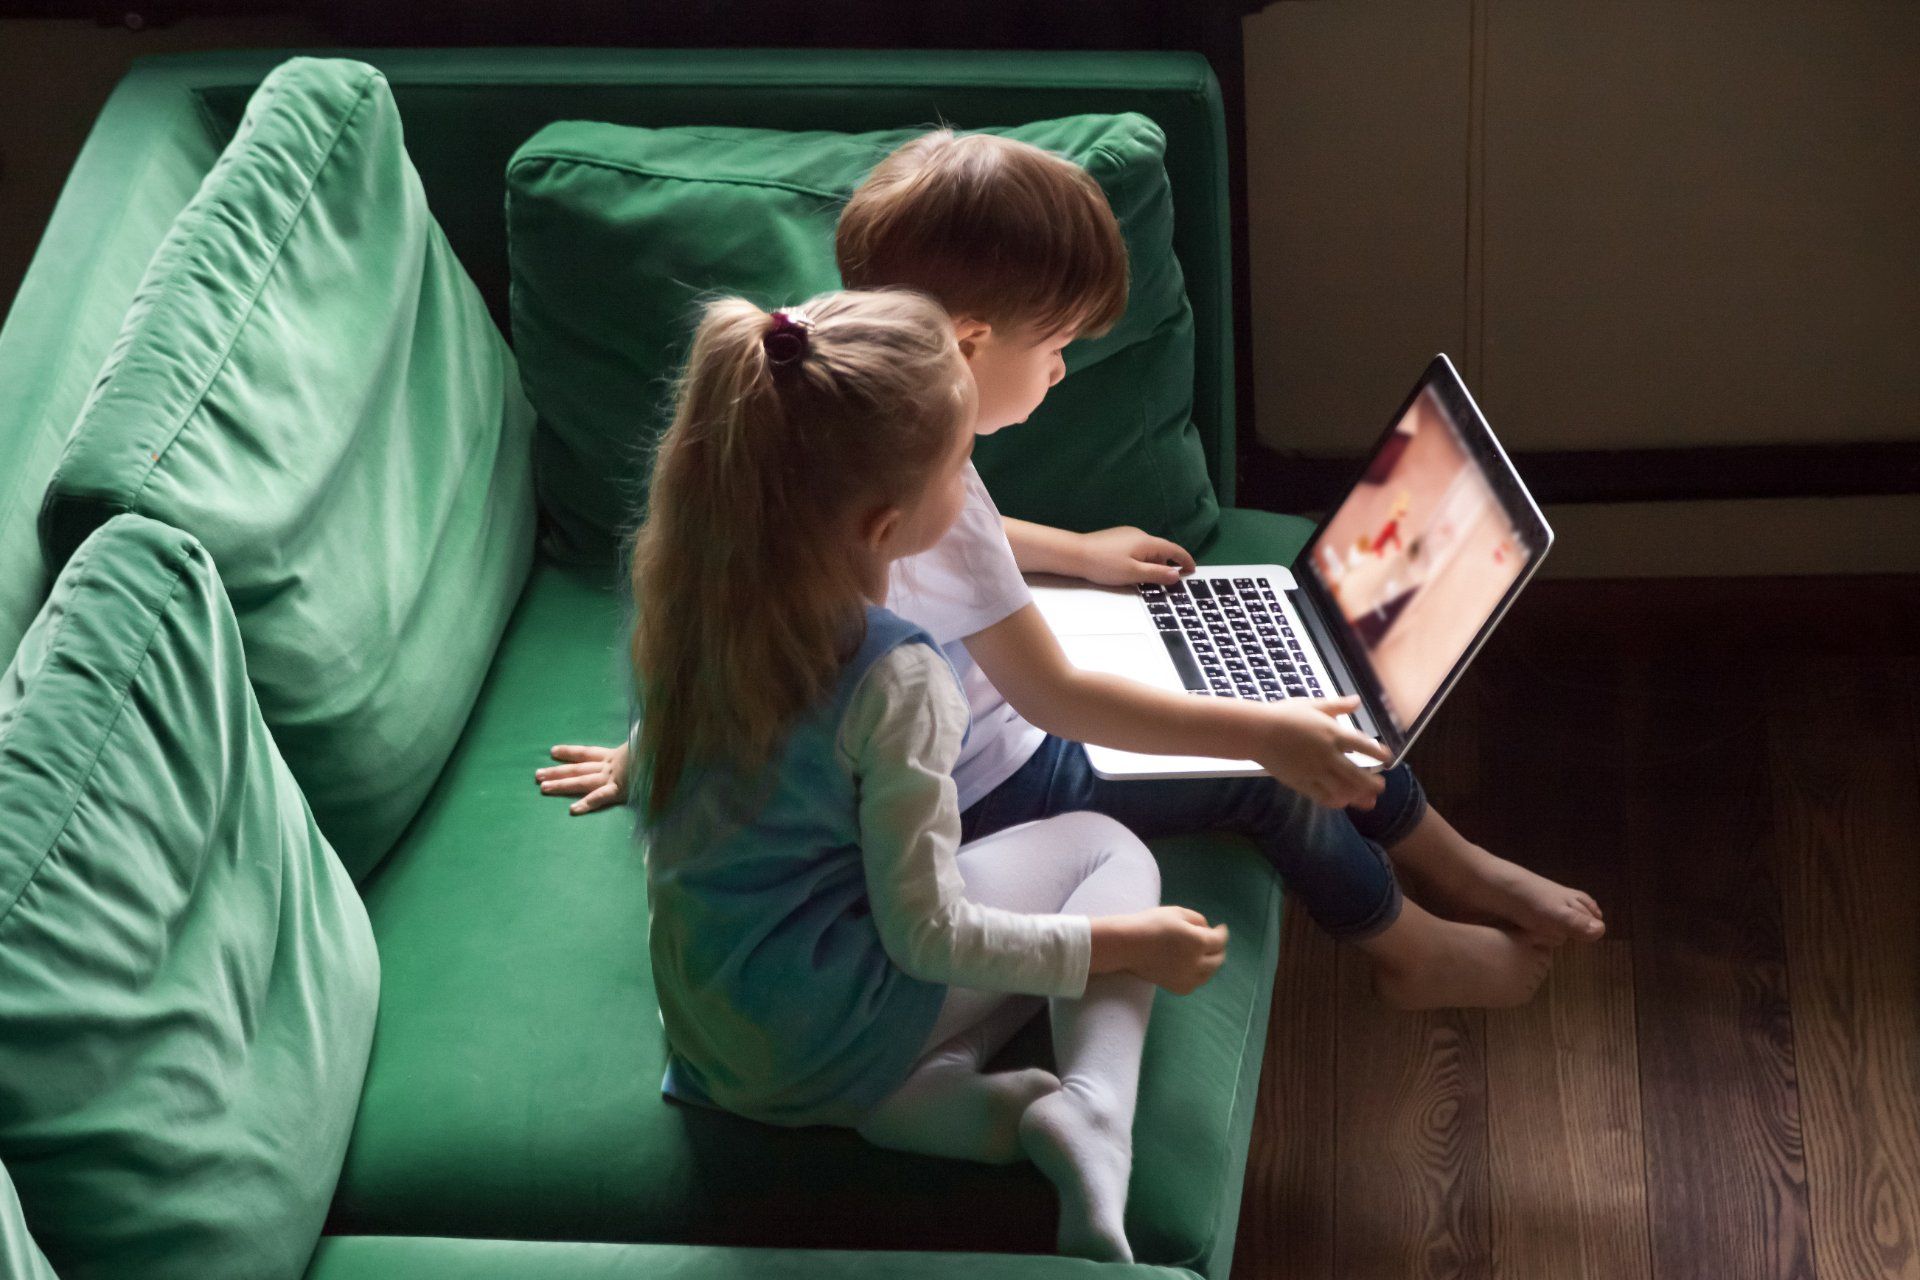 A young boy and girl sit on a green sofa while watching a video on a laptop - youtube class action lawsuit